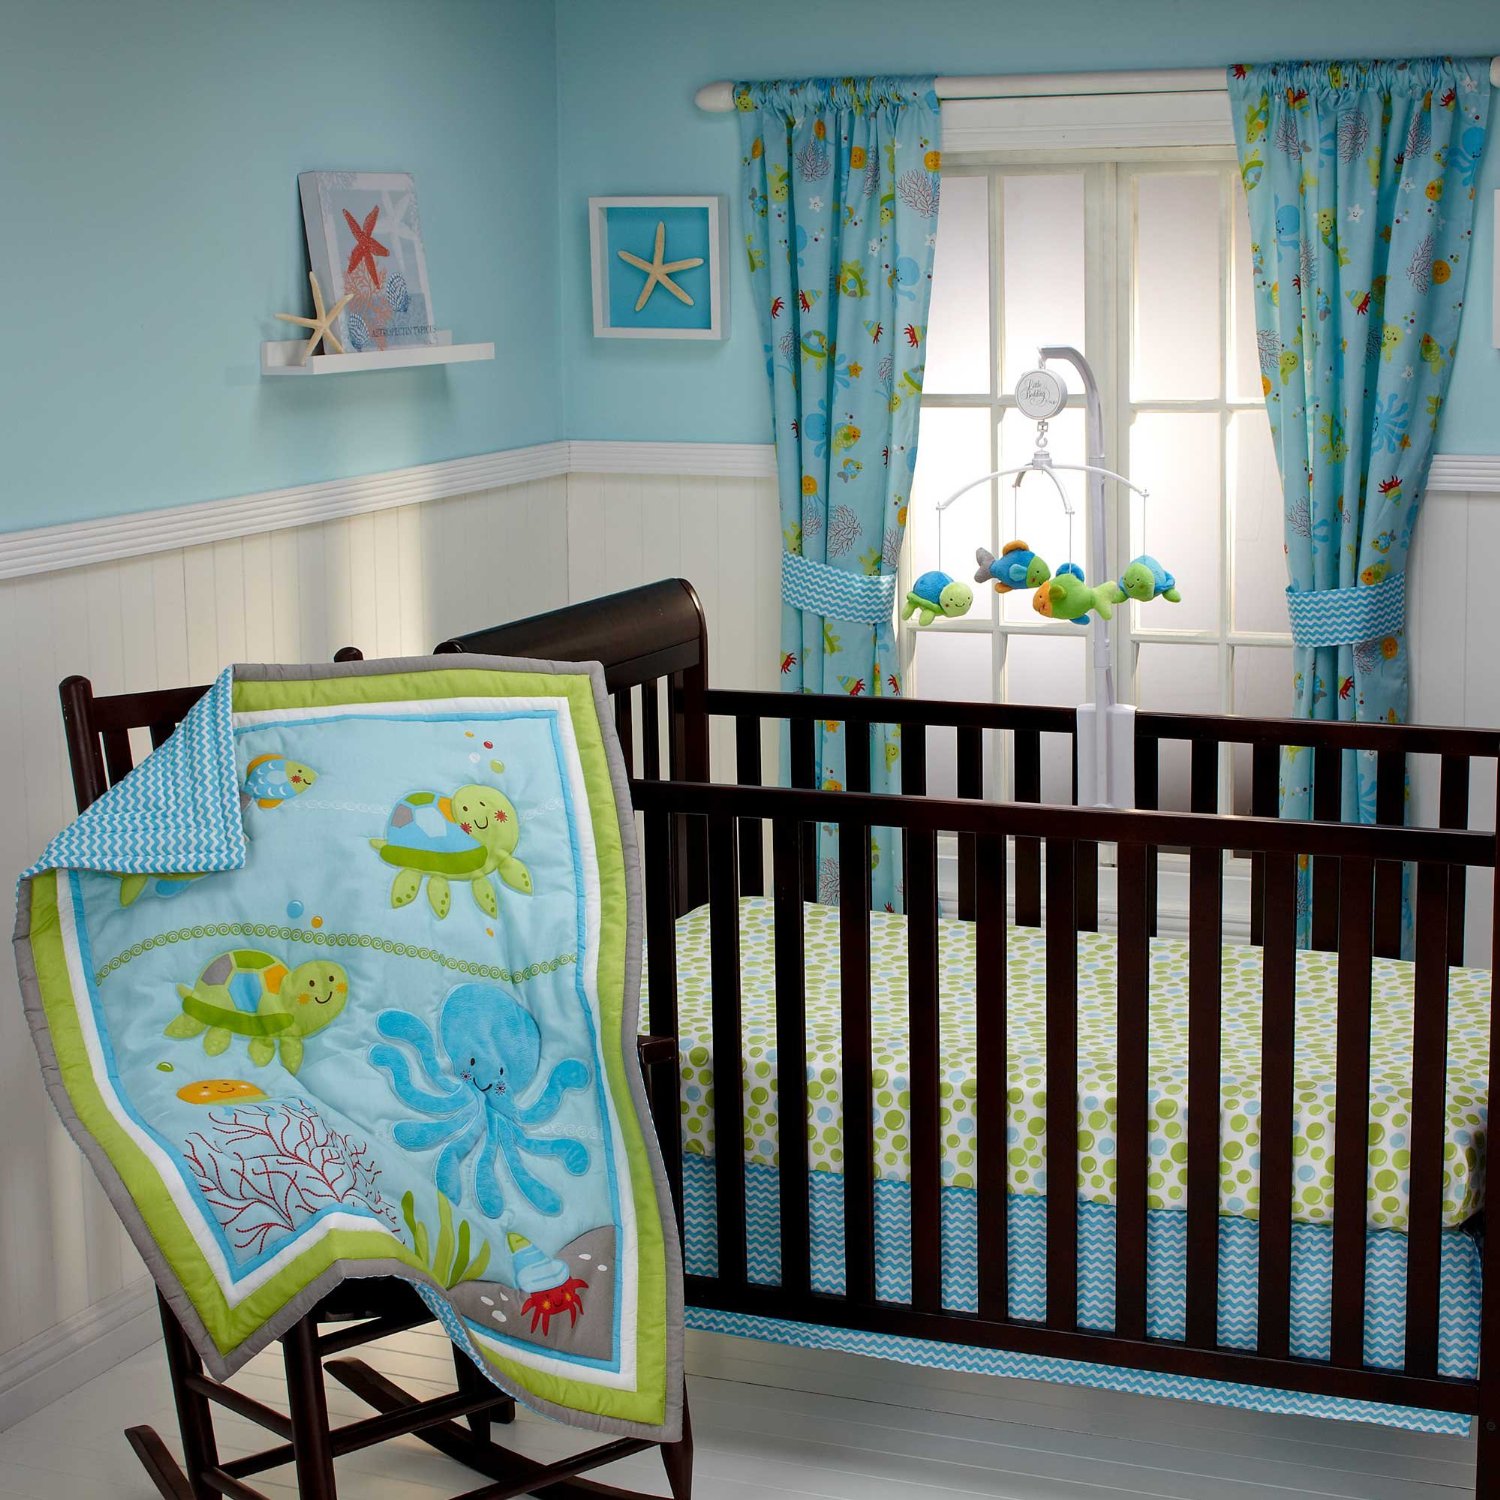 Baby bedding set with under the sea creatures for a baby boy nursery